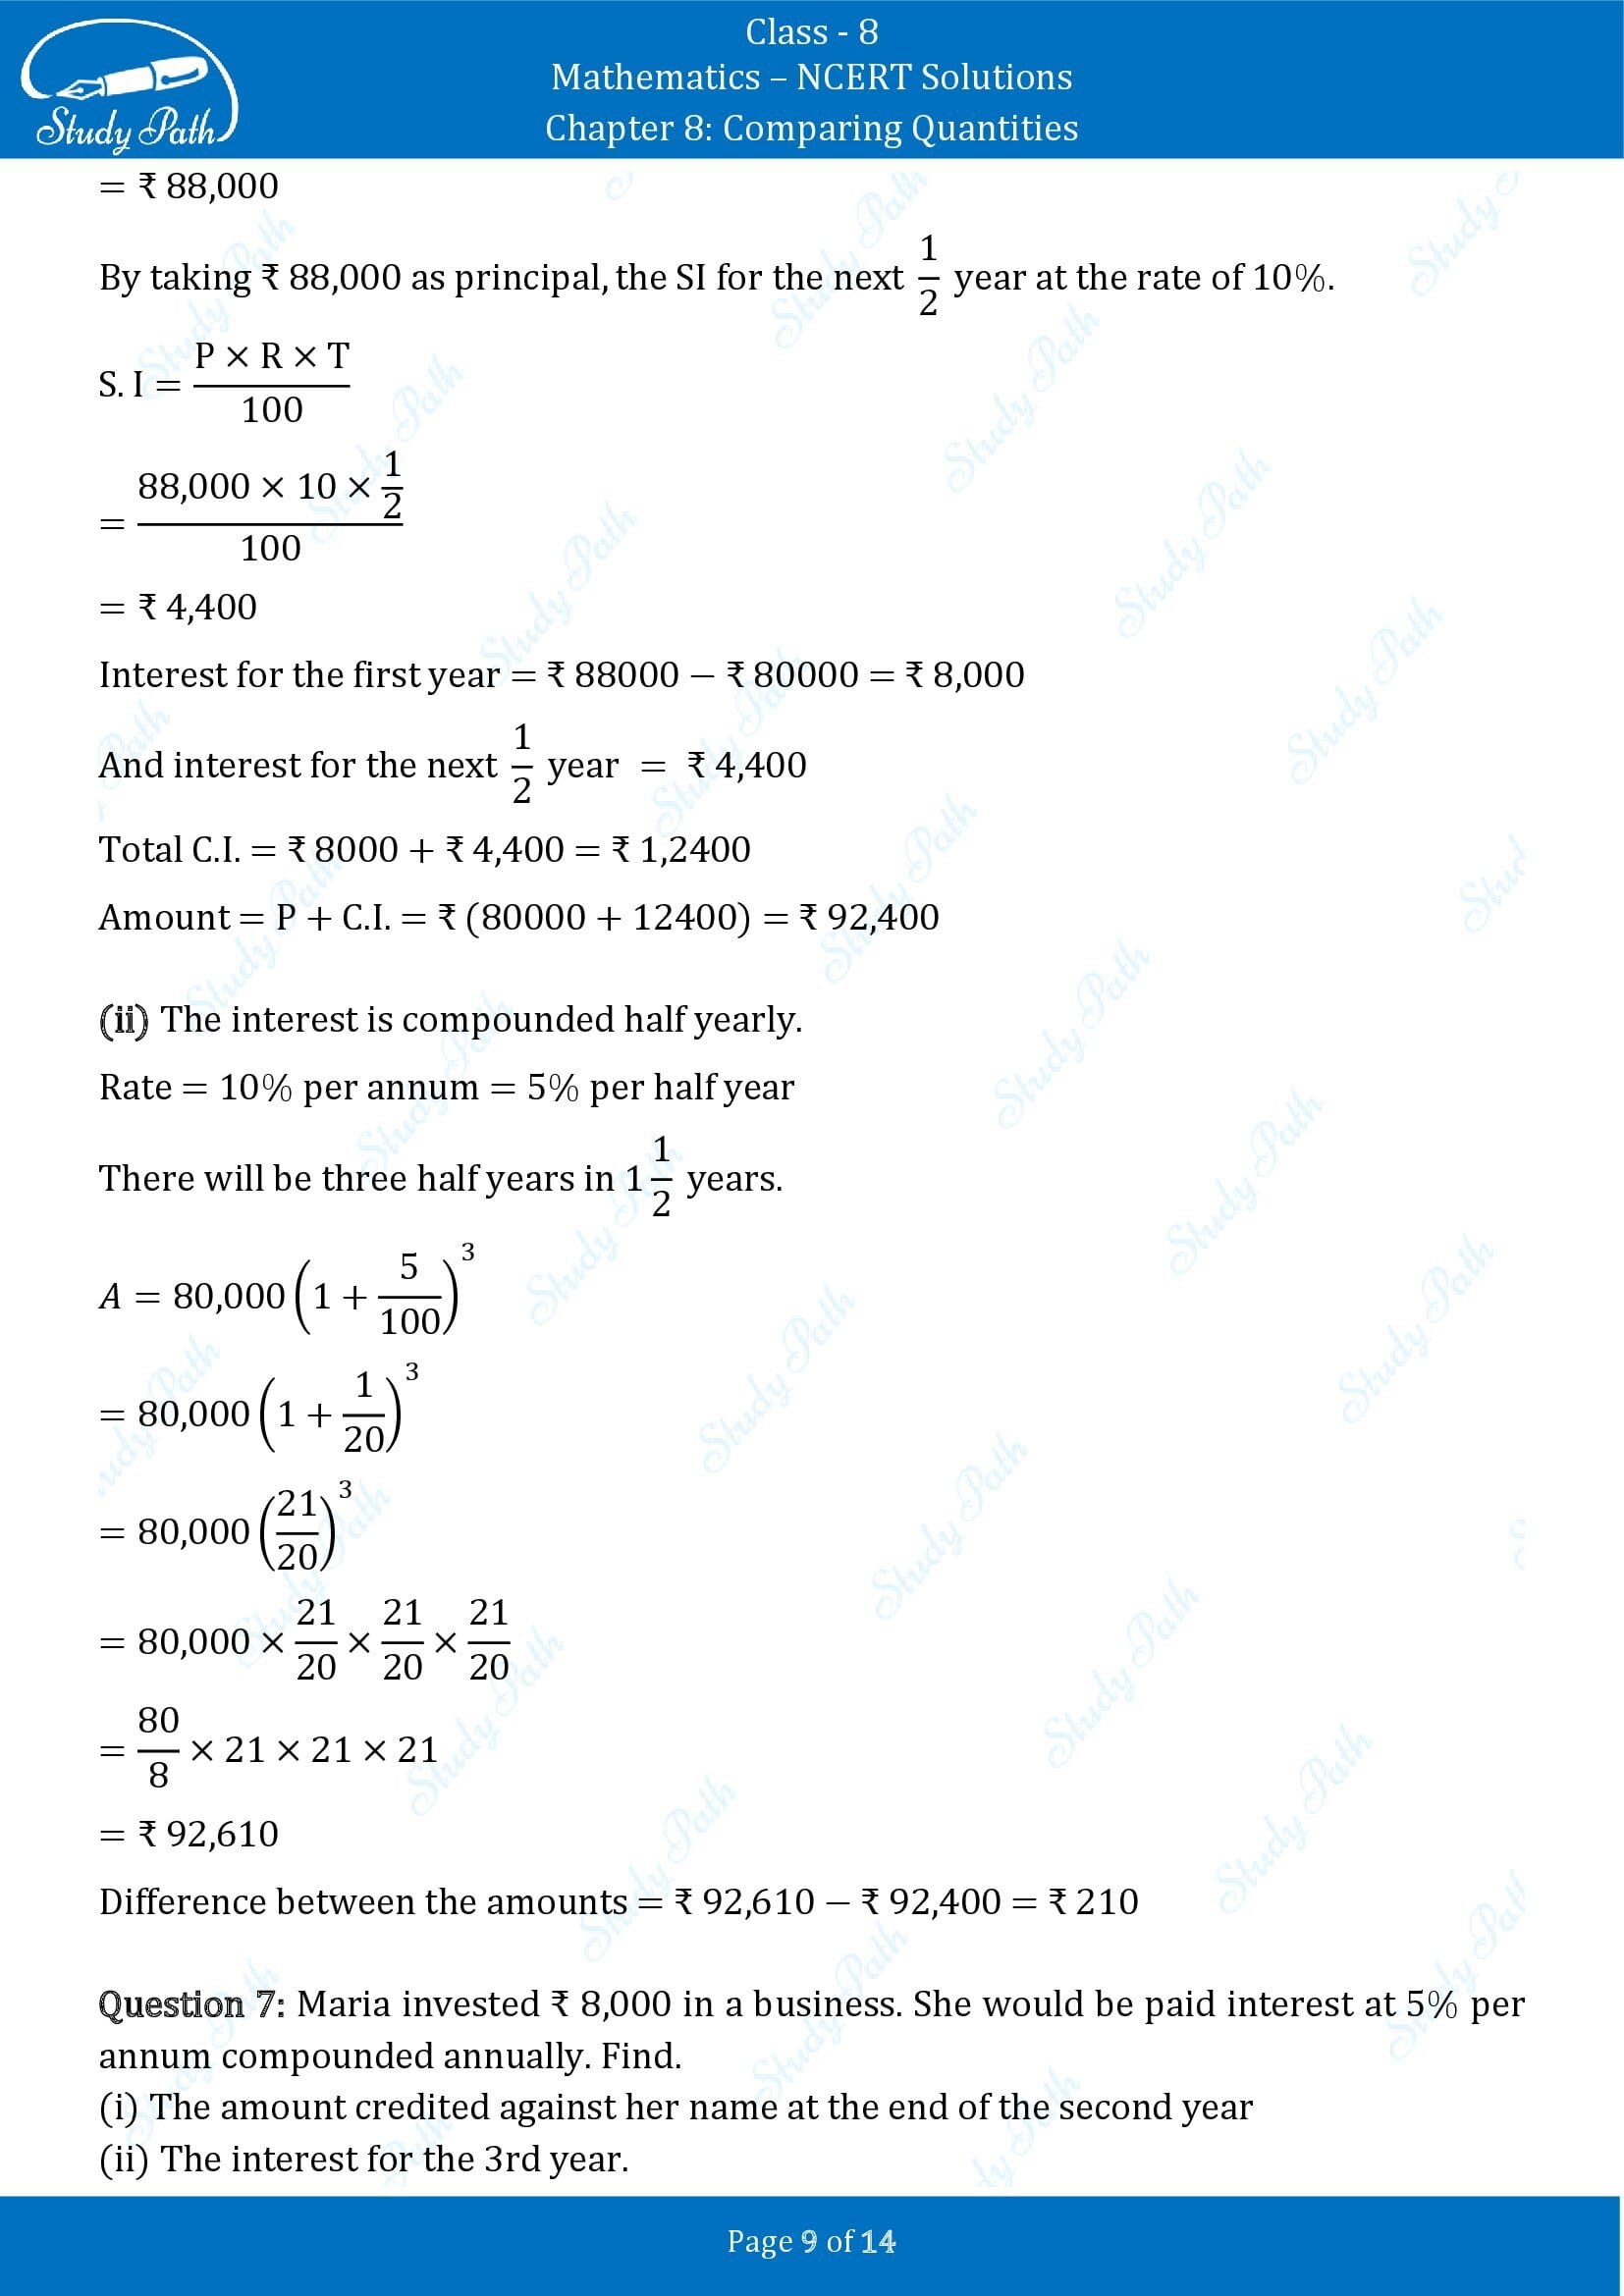 NCERT Solutions for Class 8 Maths Chapter 8 Comparing Quantities Exercise 8.3 00009